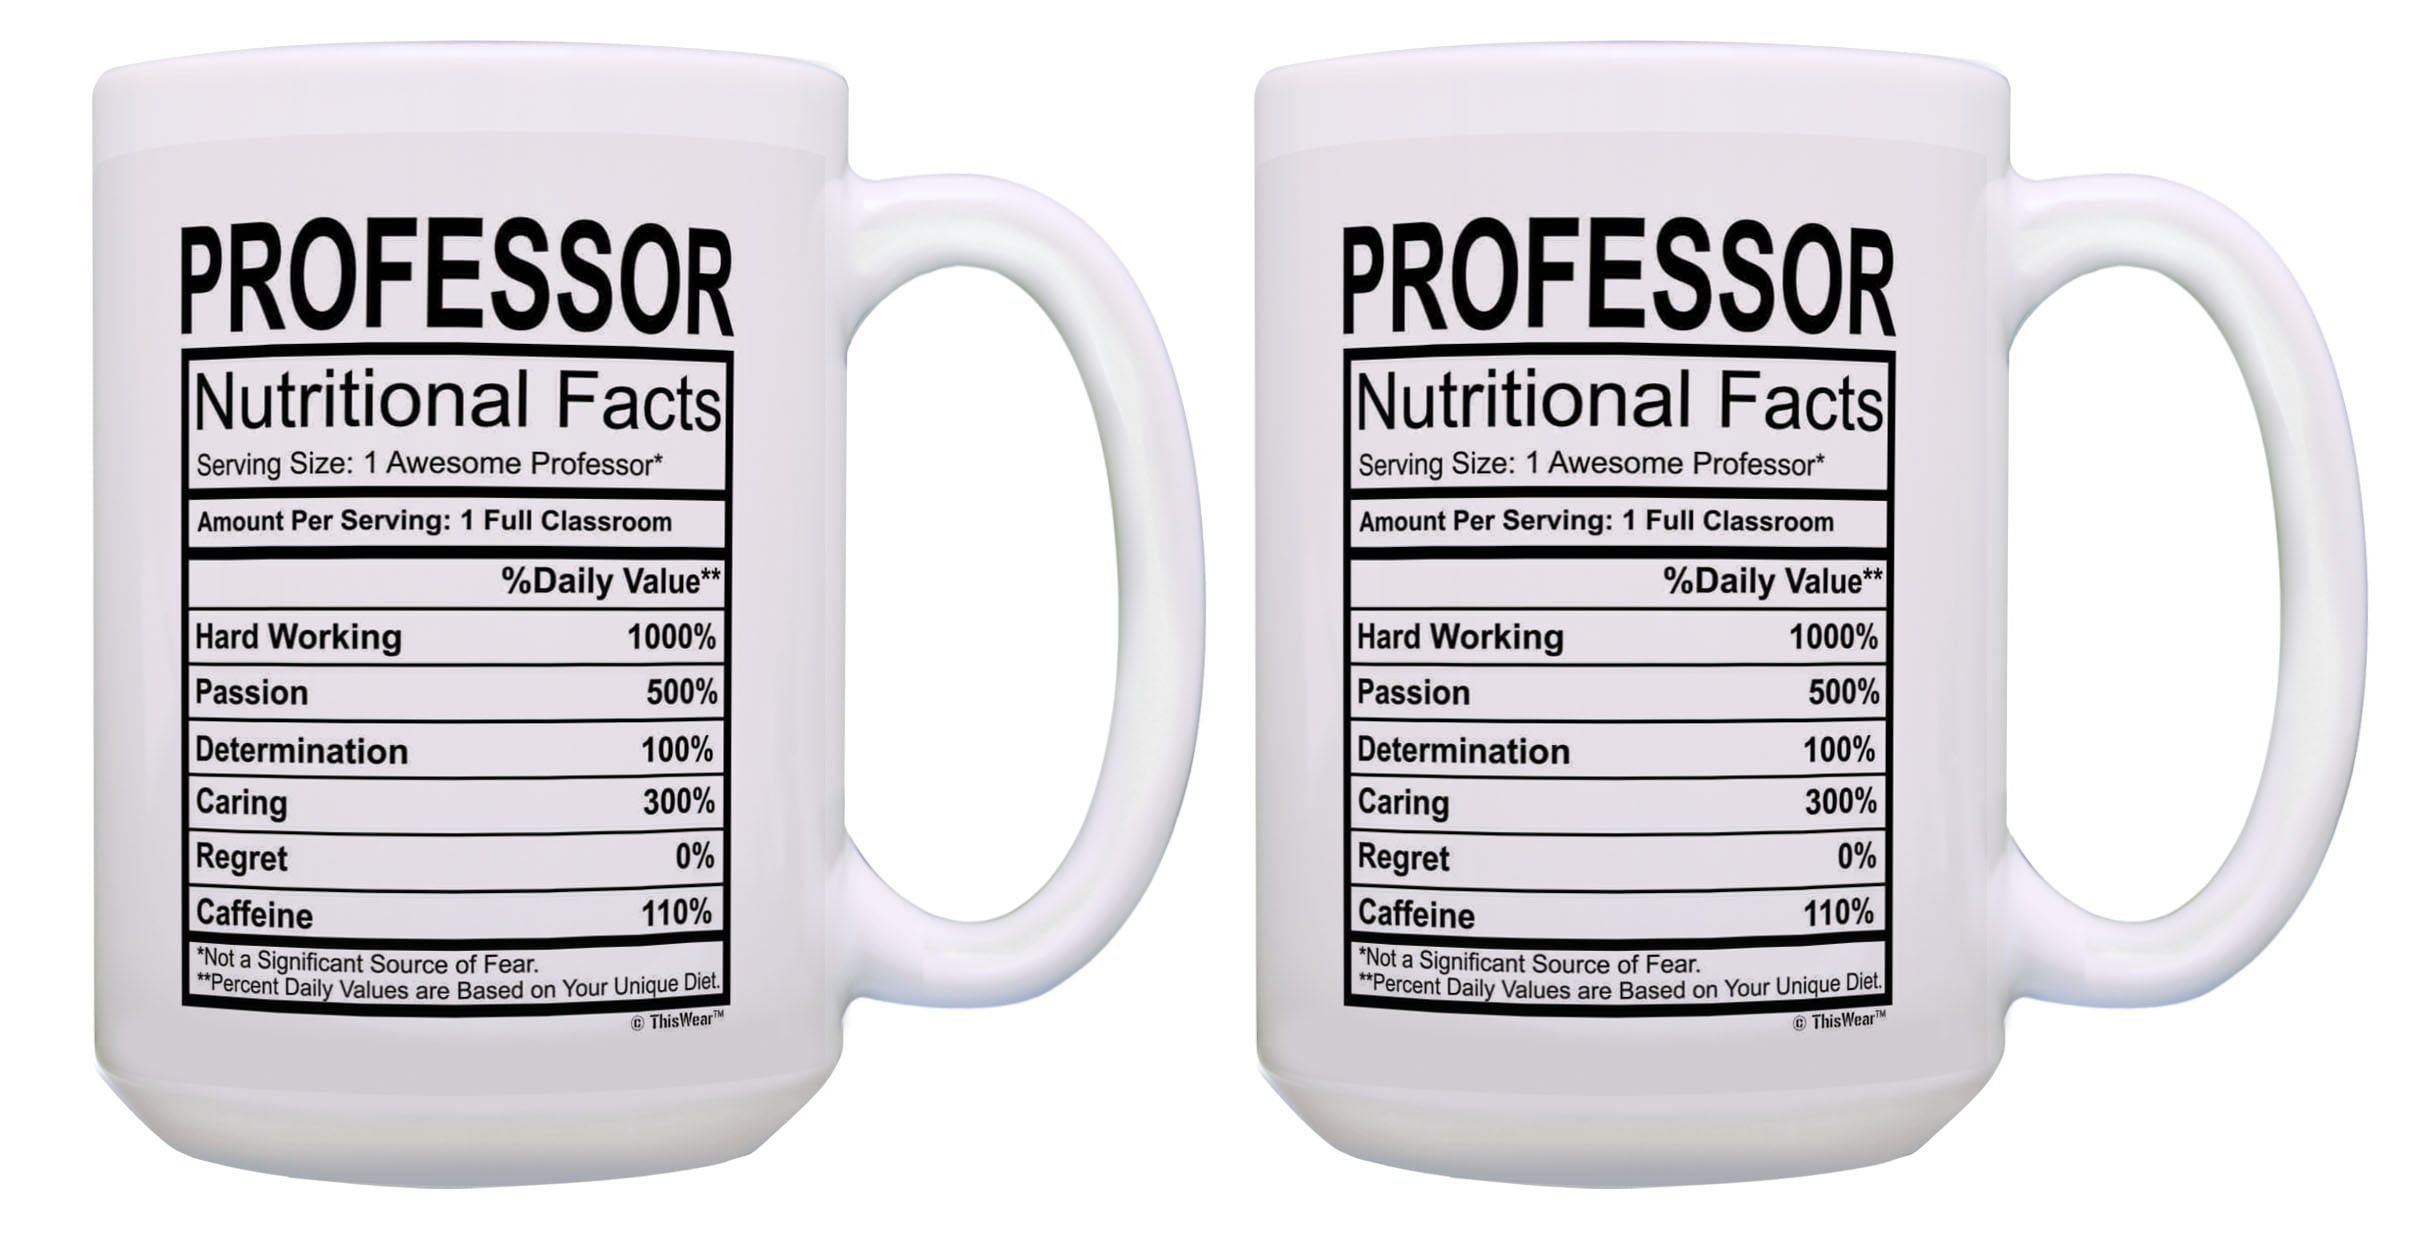 ThisWear Gifts for Teachers How To Make Iced Coffee Best Teacher Gifts for  Women Teacher Mugs 11 ounce 2 Pack Coffee Mugs 